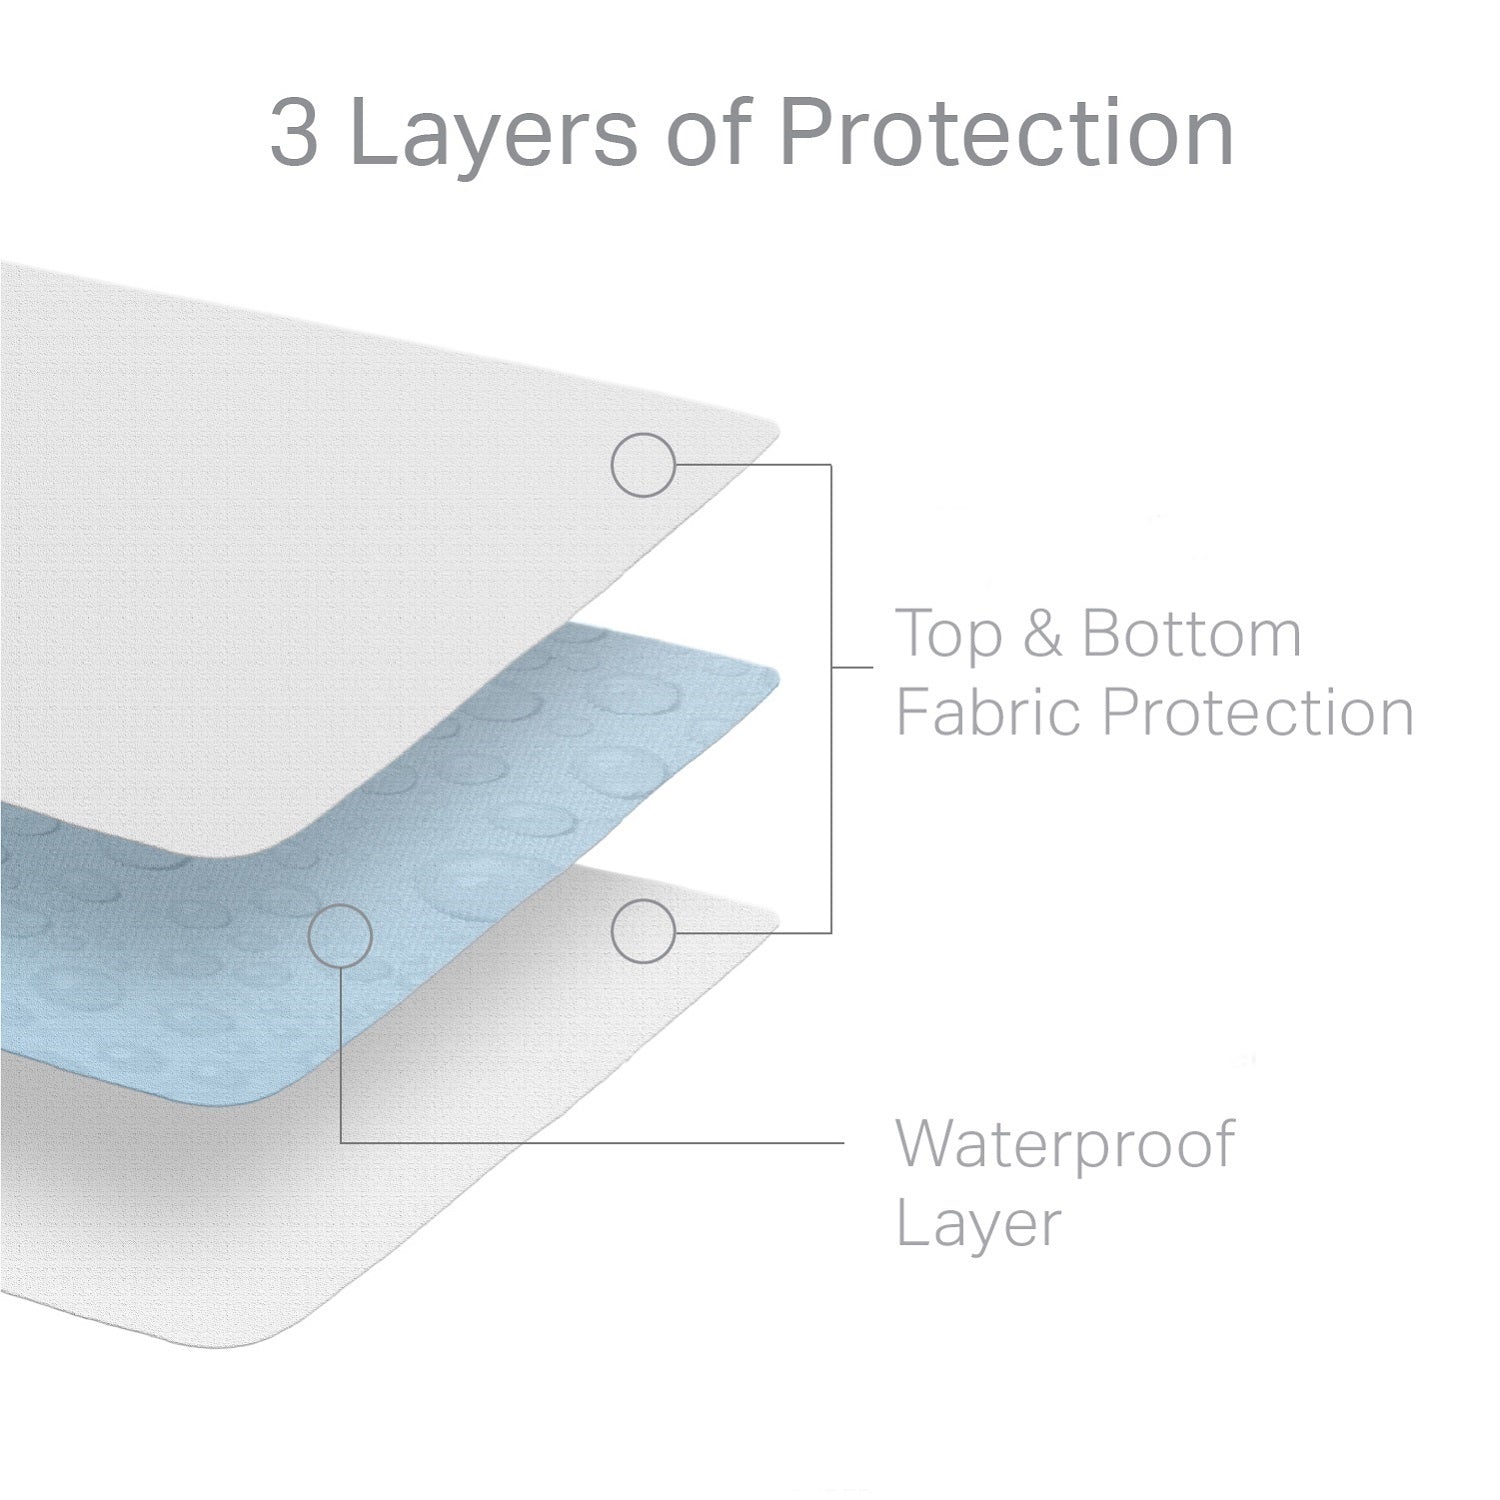 Hotel-Grade 5-Sided Mattress Protector layers of protection 